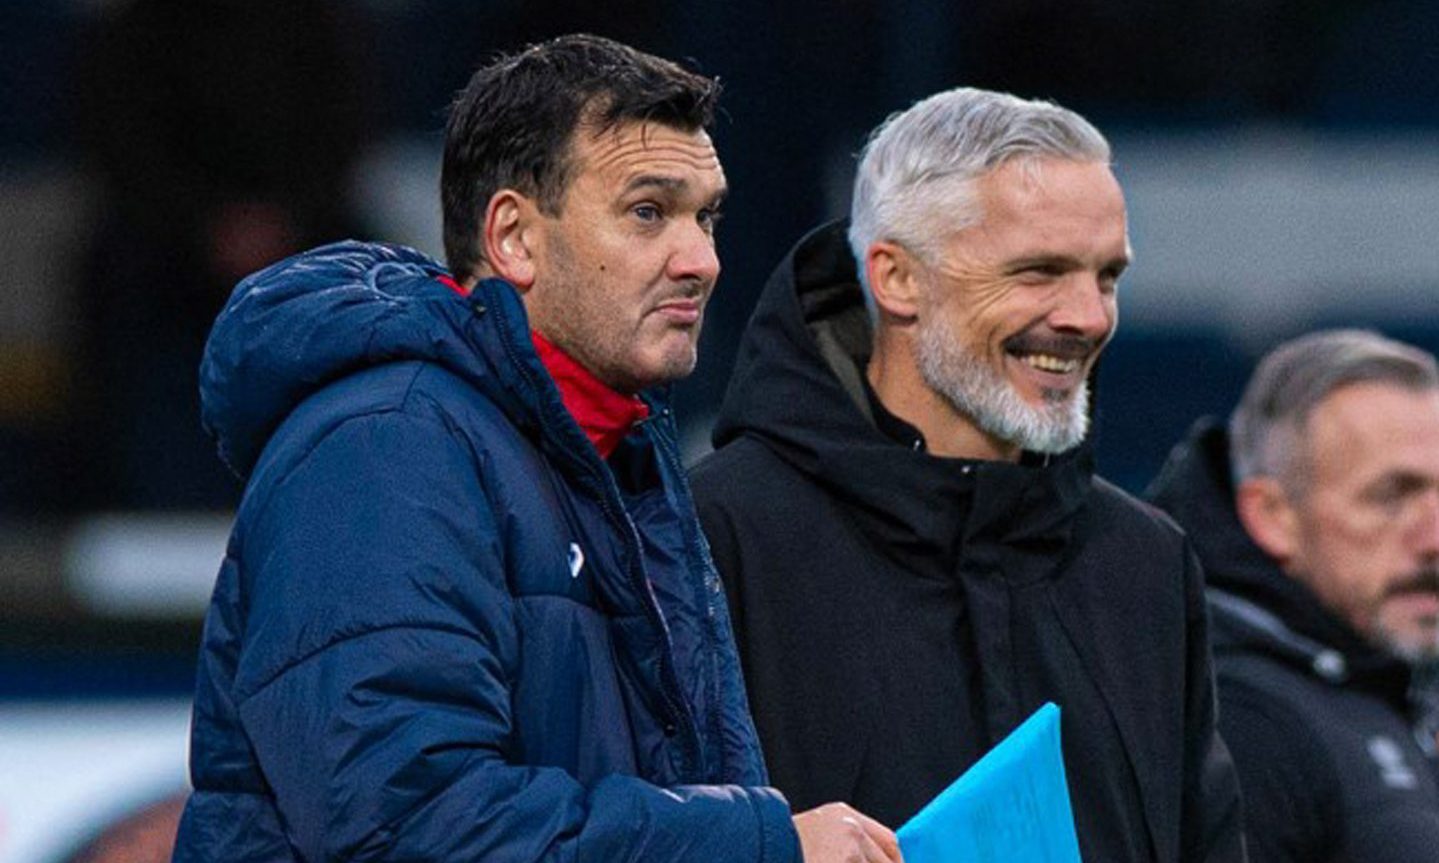 Raith Rovers boss Ian Murray and Dundee United manager Jim Goodwin share a laugh on the sidelines.